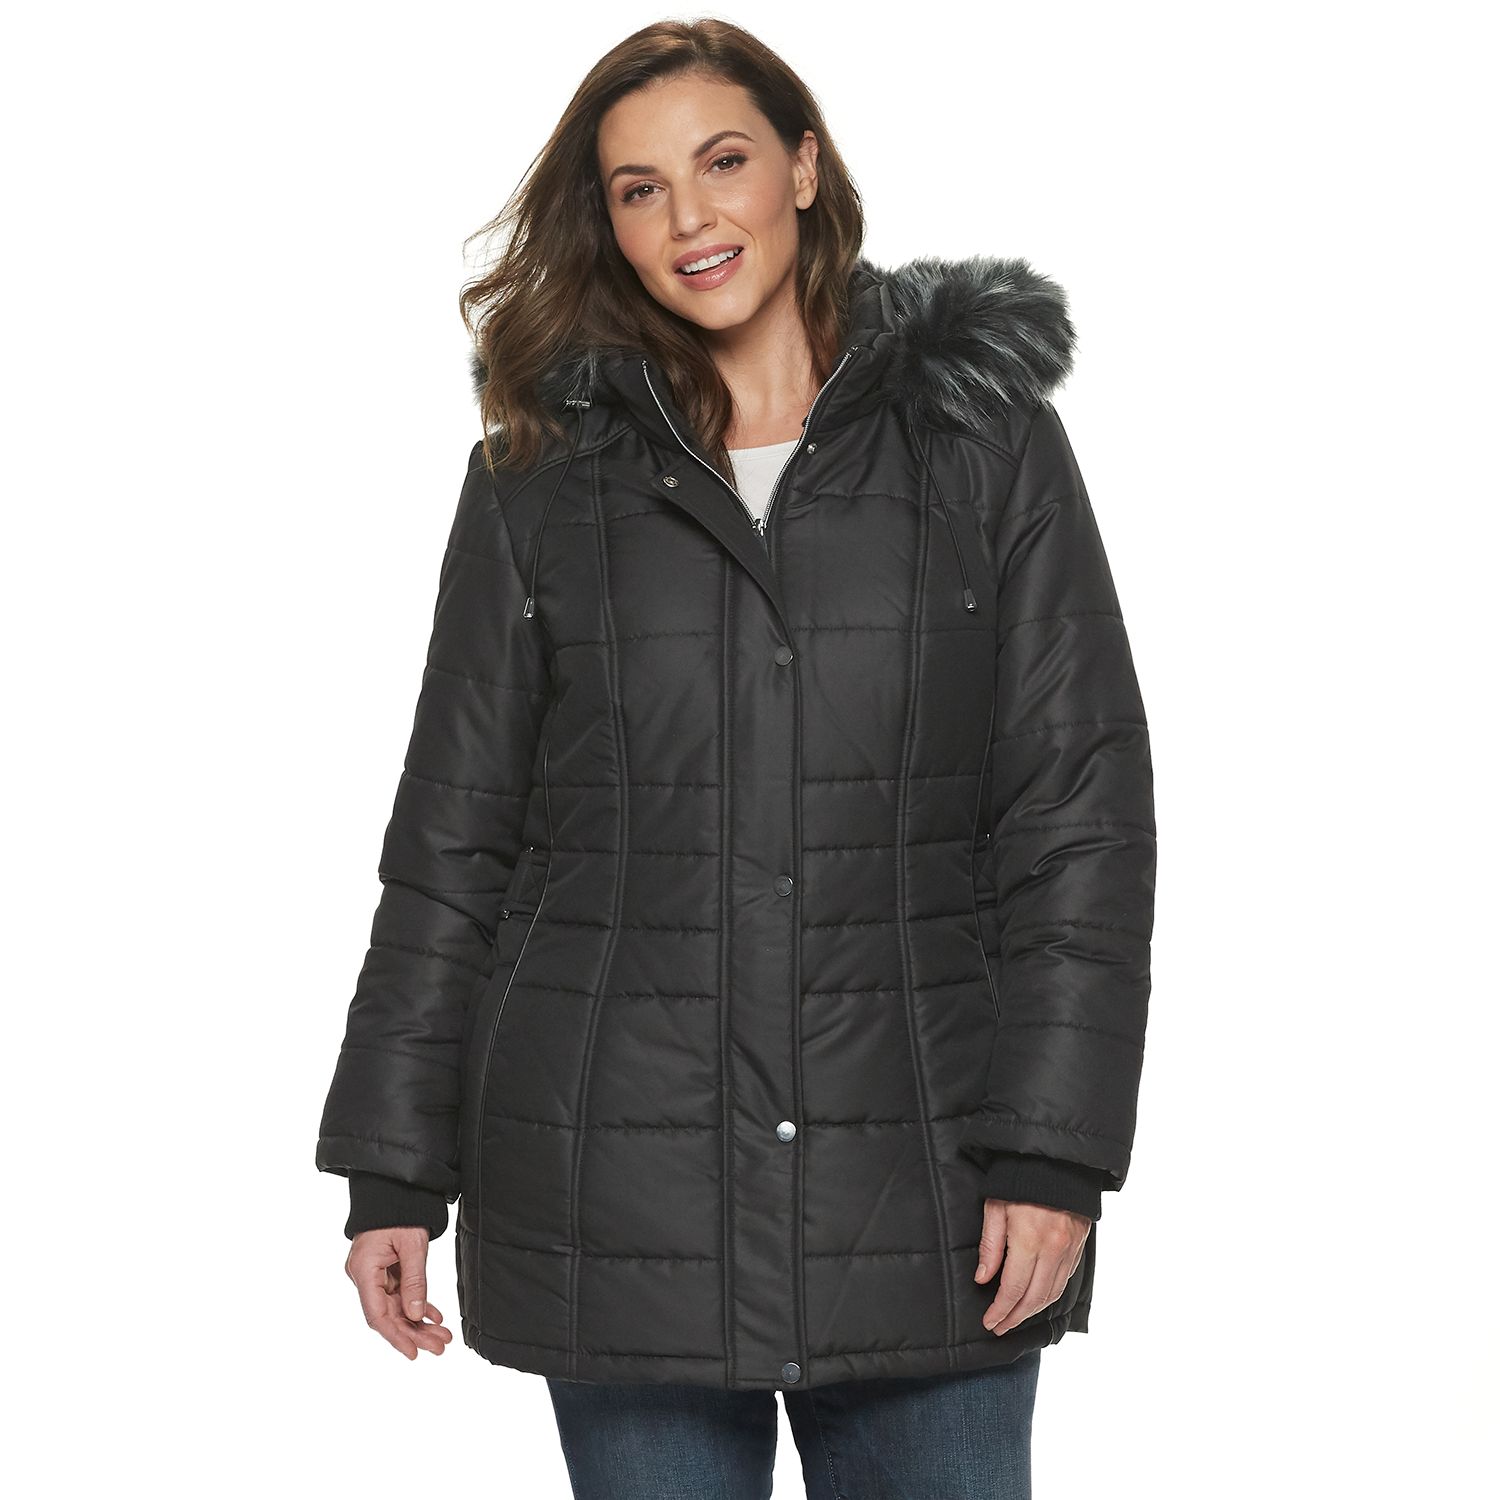 plus size puffer jacket with fur hood